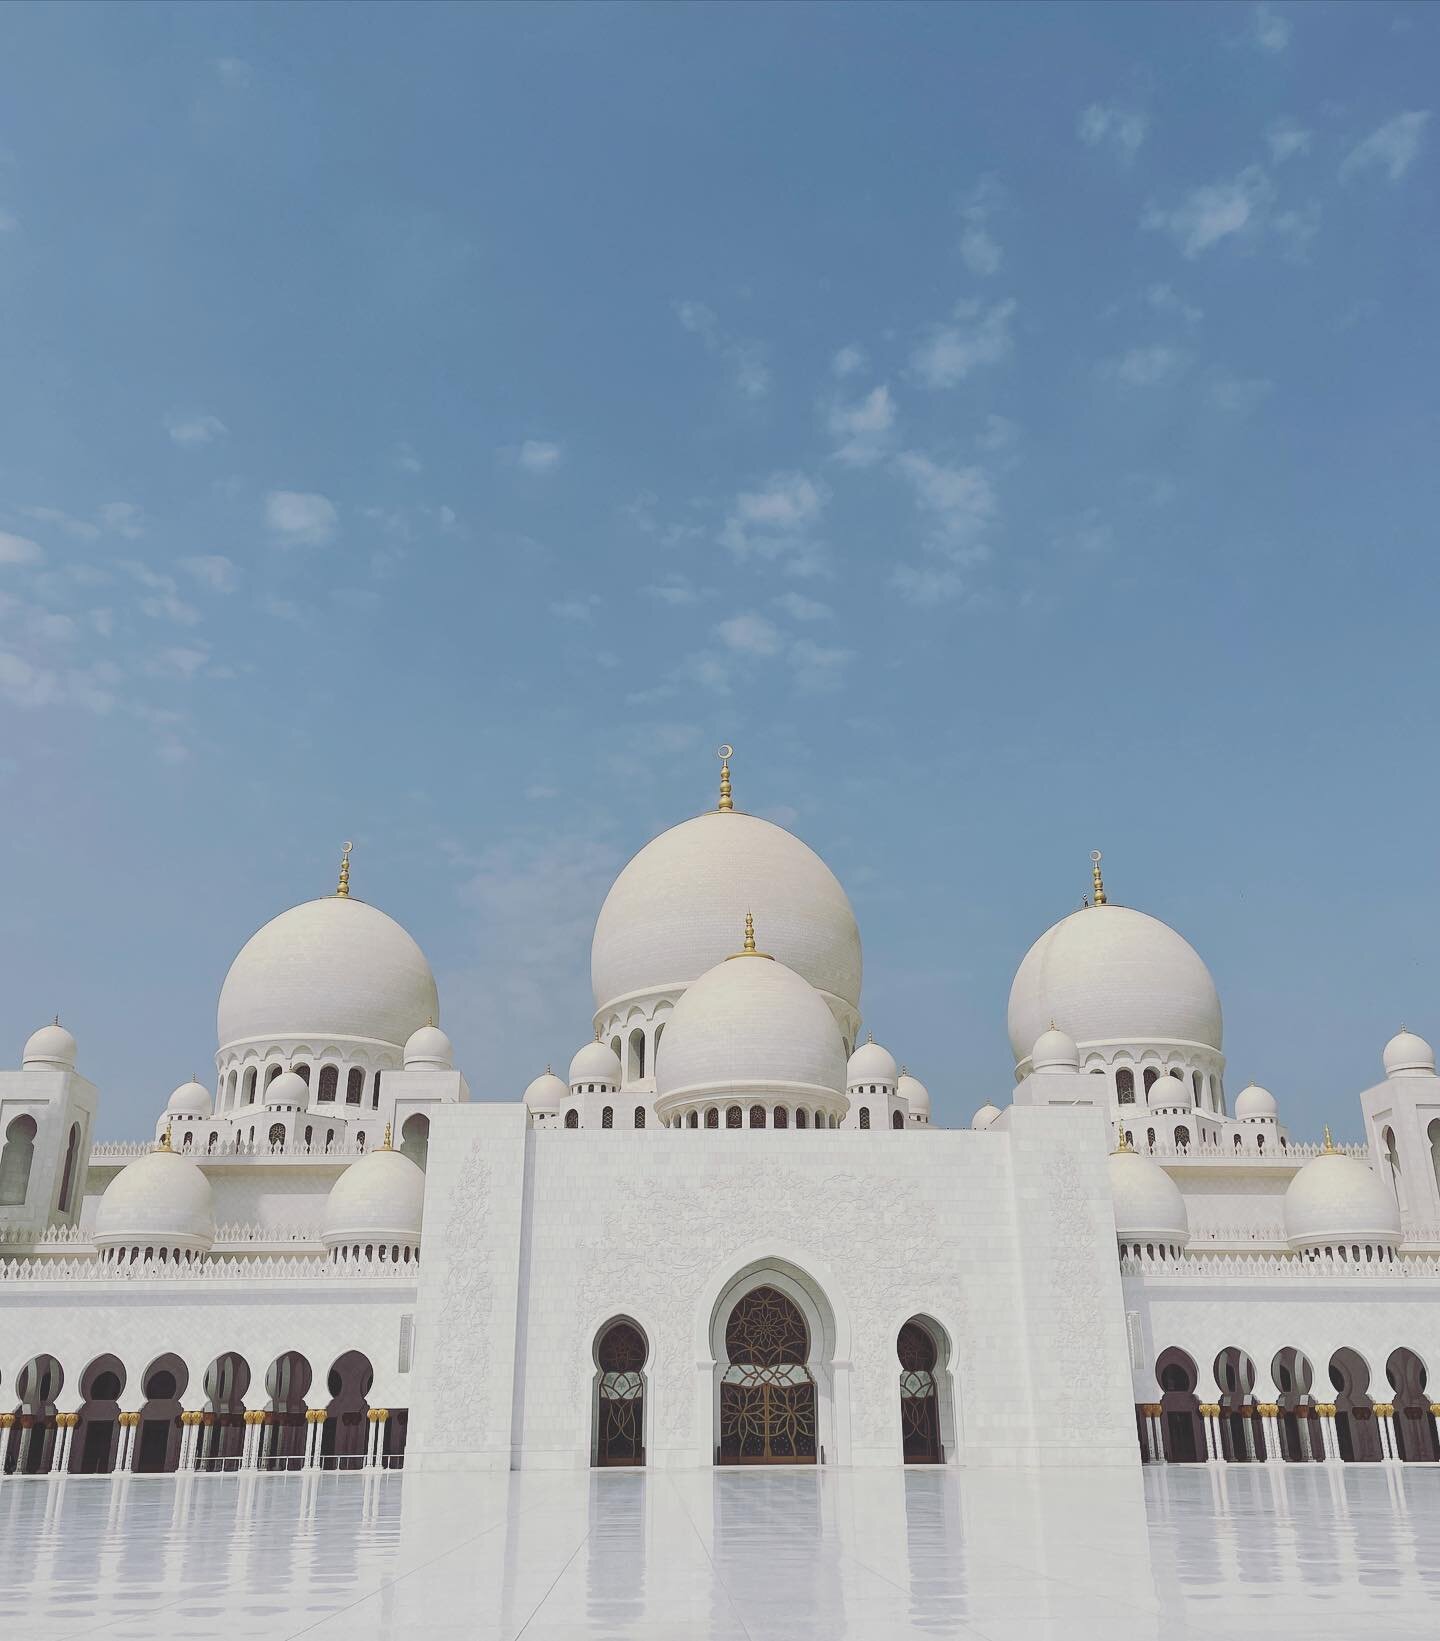 The Grand Mosque in Abu Dhabi - hard to put in words what we saw. The beauty, the craftsmanship, the grandeur, the scale, the details, the stories. A breathtaking place of worship and an architectural masterpiece.